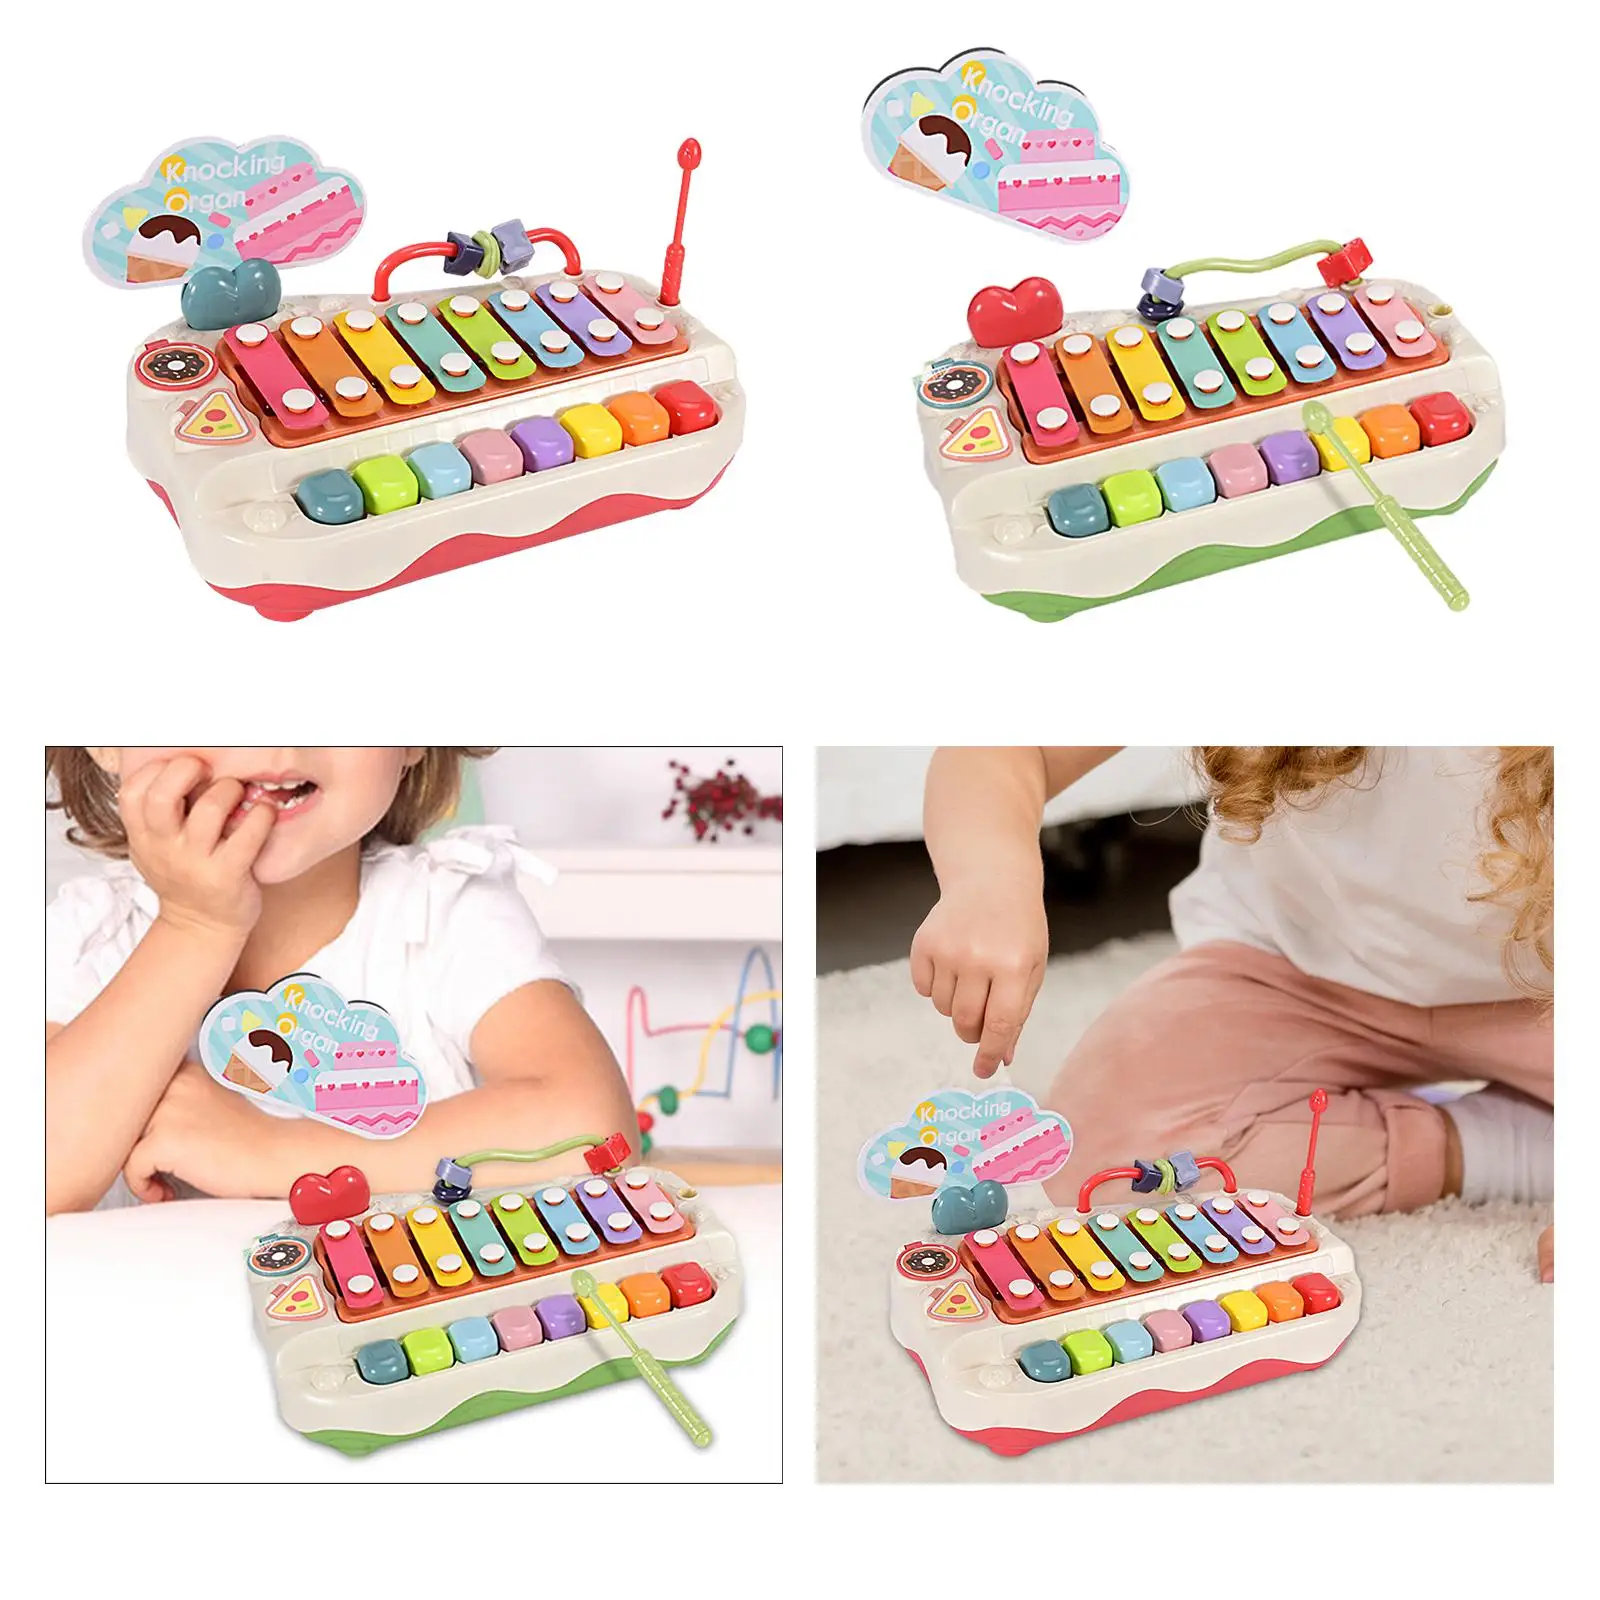 Baby Musical Toy Baby Piano Xylophone Toy Hammering Pounding Toys for Toddler 1 2 3 Years Old Kids Boy Girls Baby Birthday Gift